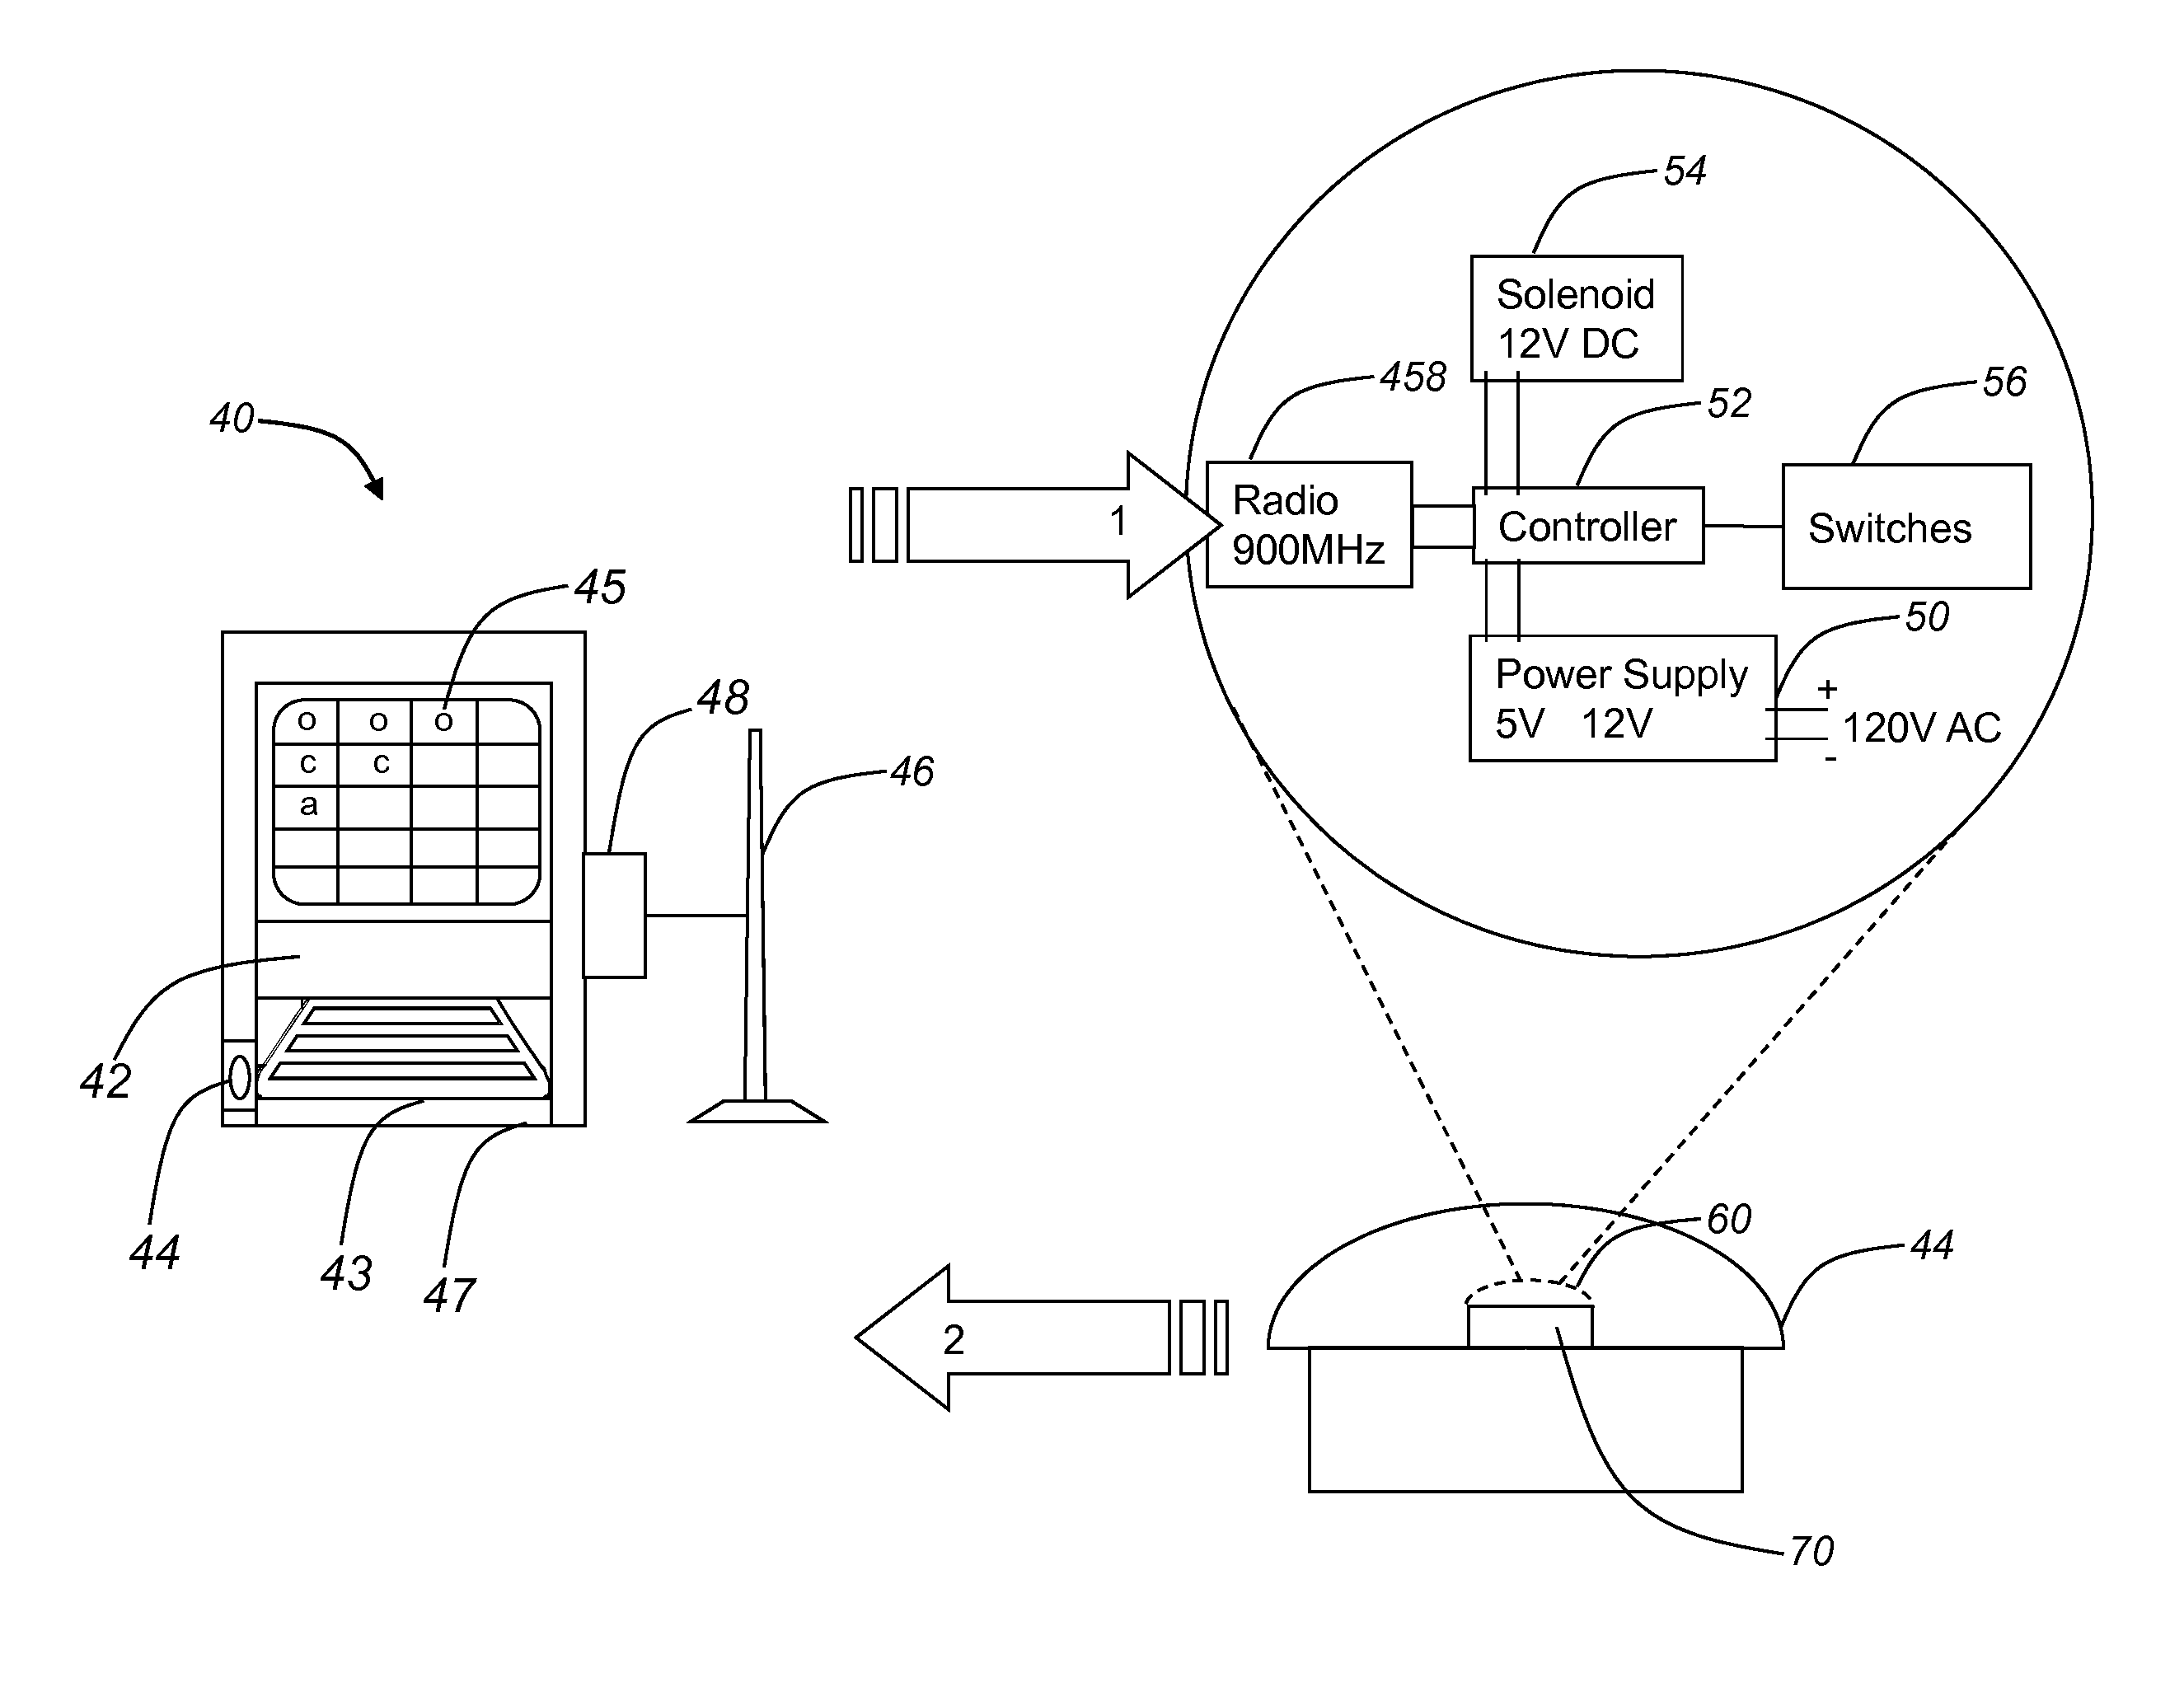 Asset security system and associated methods for selectively granting access